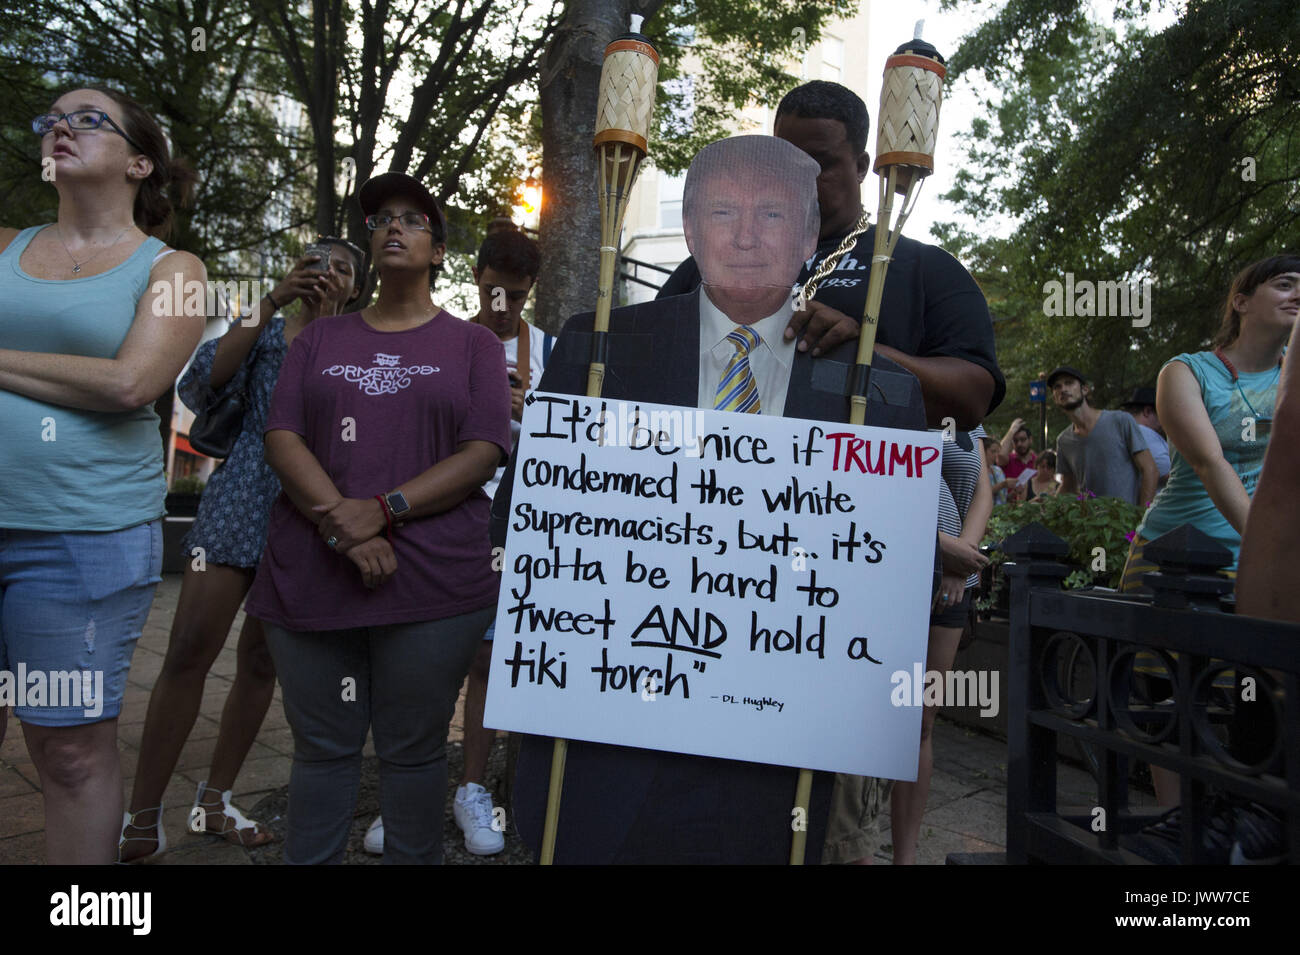 Atlanta, GA, USA. 13th Aug, 2017. Anti-Fascist protestors gather in downtown Atlanta and march along Peachtree Street, showing their support of those who demonstrated against white supremacist group in Charlottesville, VA. Rally organized by Antifa, an organization nationally that fights fascism.Pictured: Gathering of several hundred to demonstrate anger at Charlottesville VA tragedy. Credit: Robin Rayne Nelson/ZUMA Wire/Alamy Live News Stock Photo